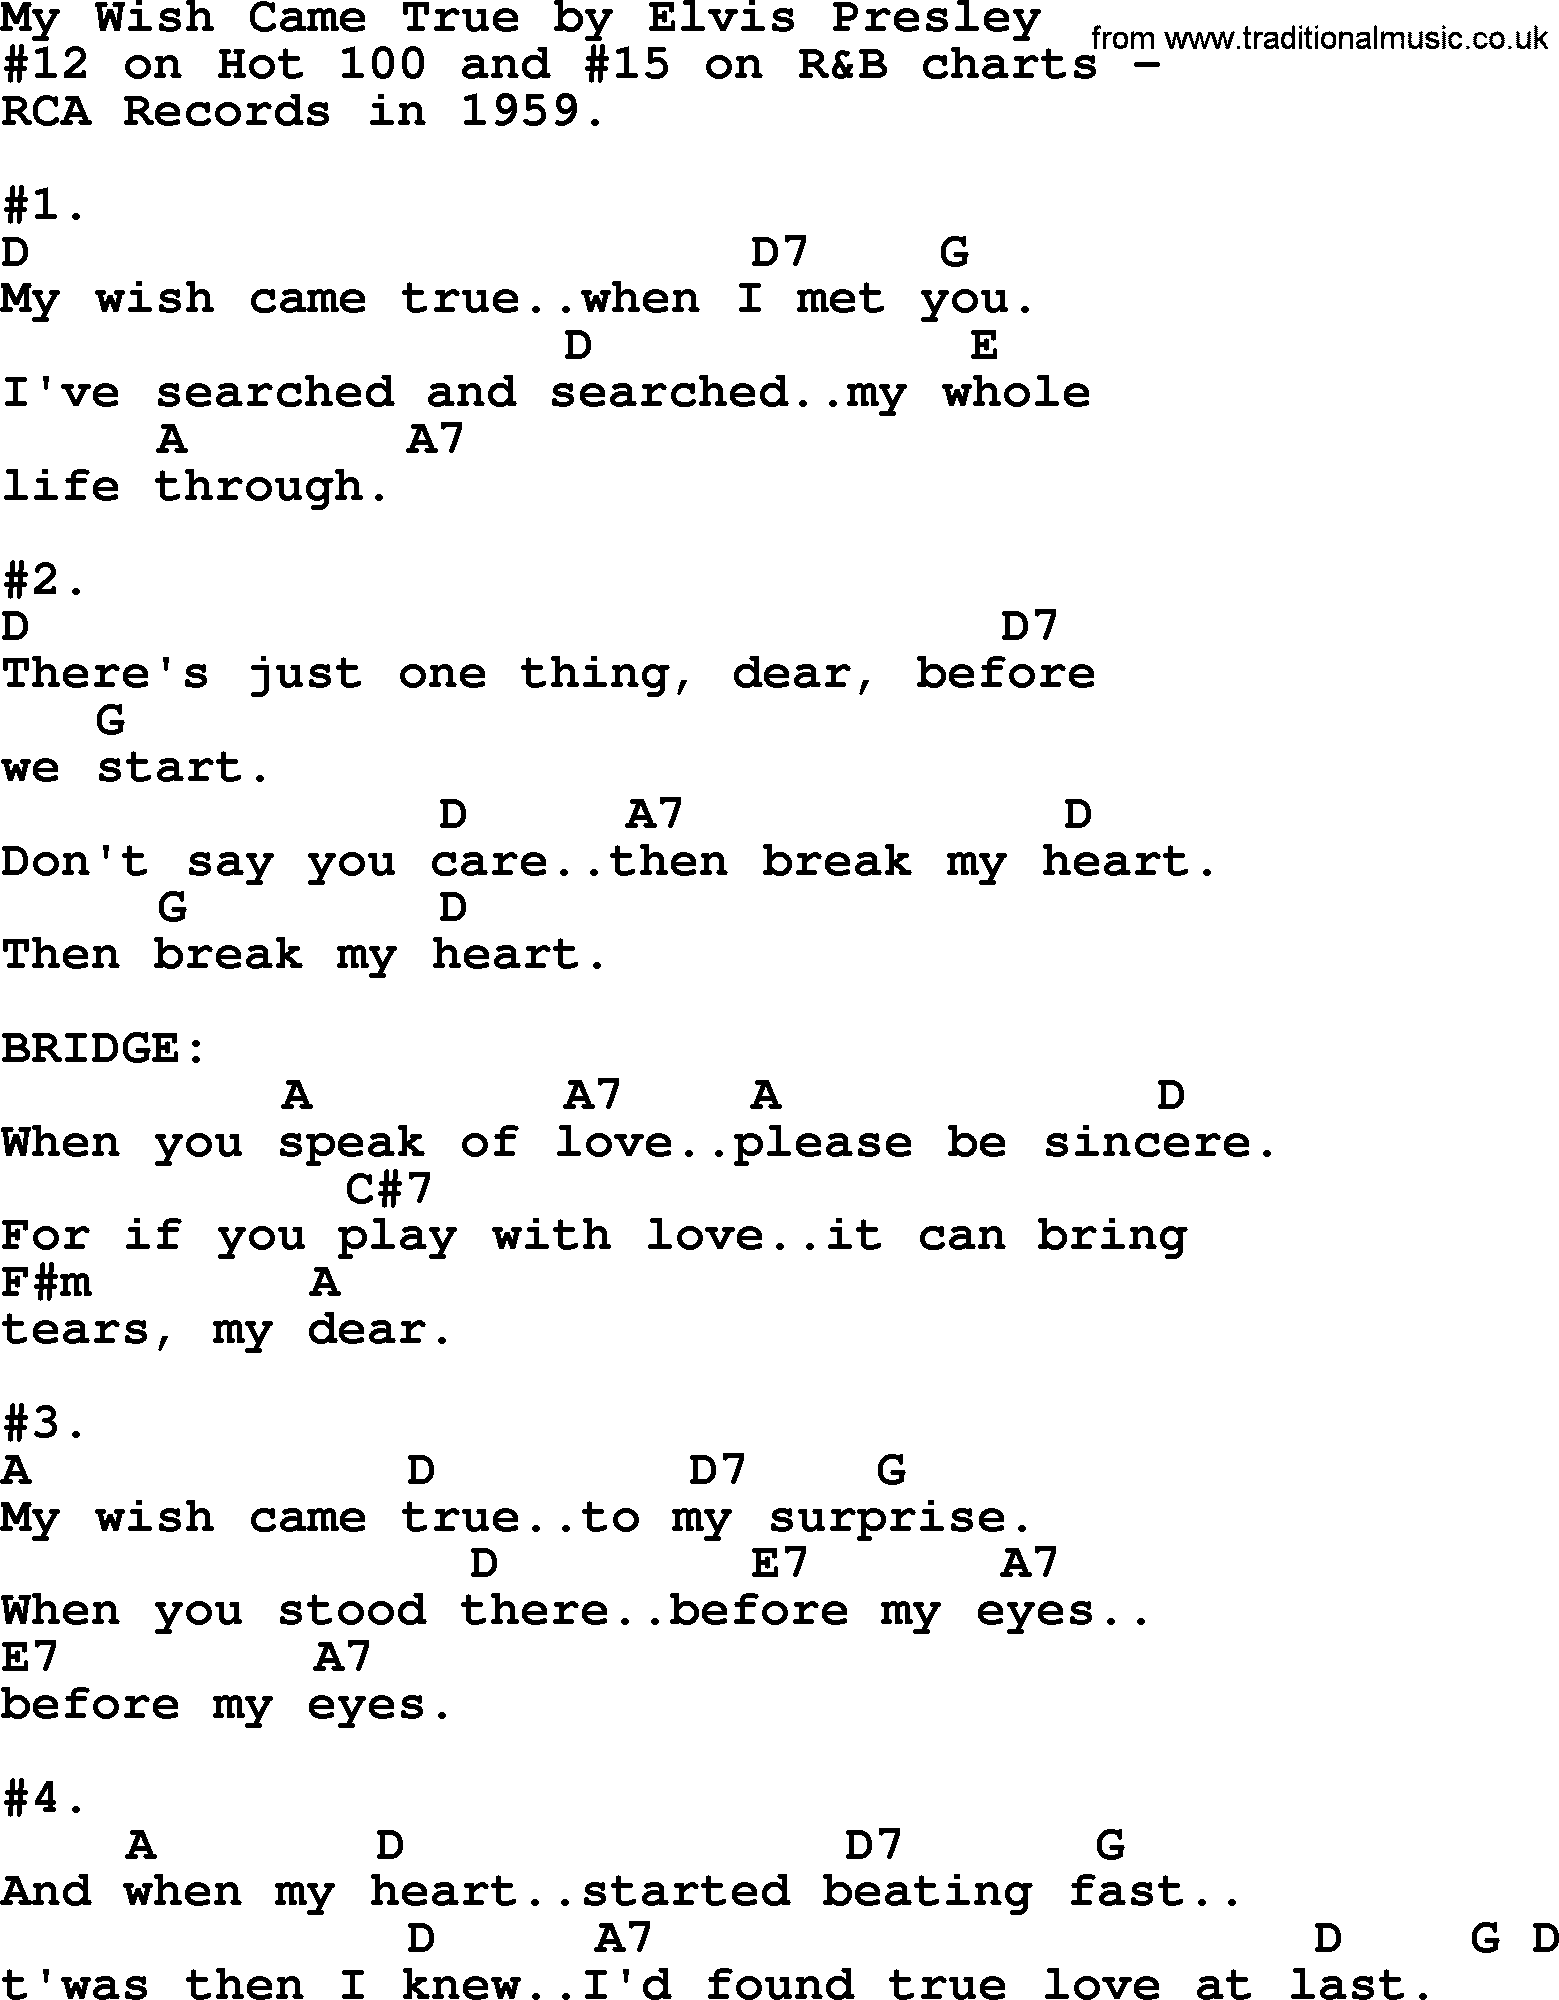 Elvis Presley song: My Wish Came True, lyrics and chords